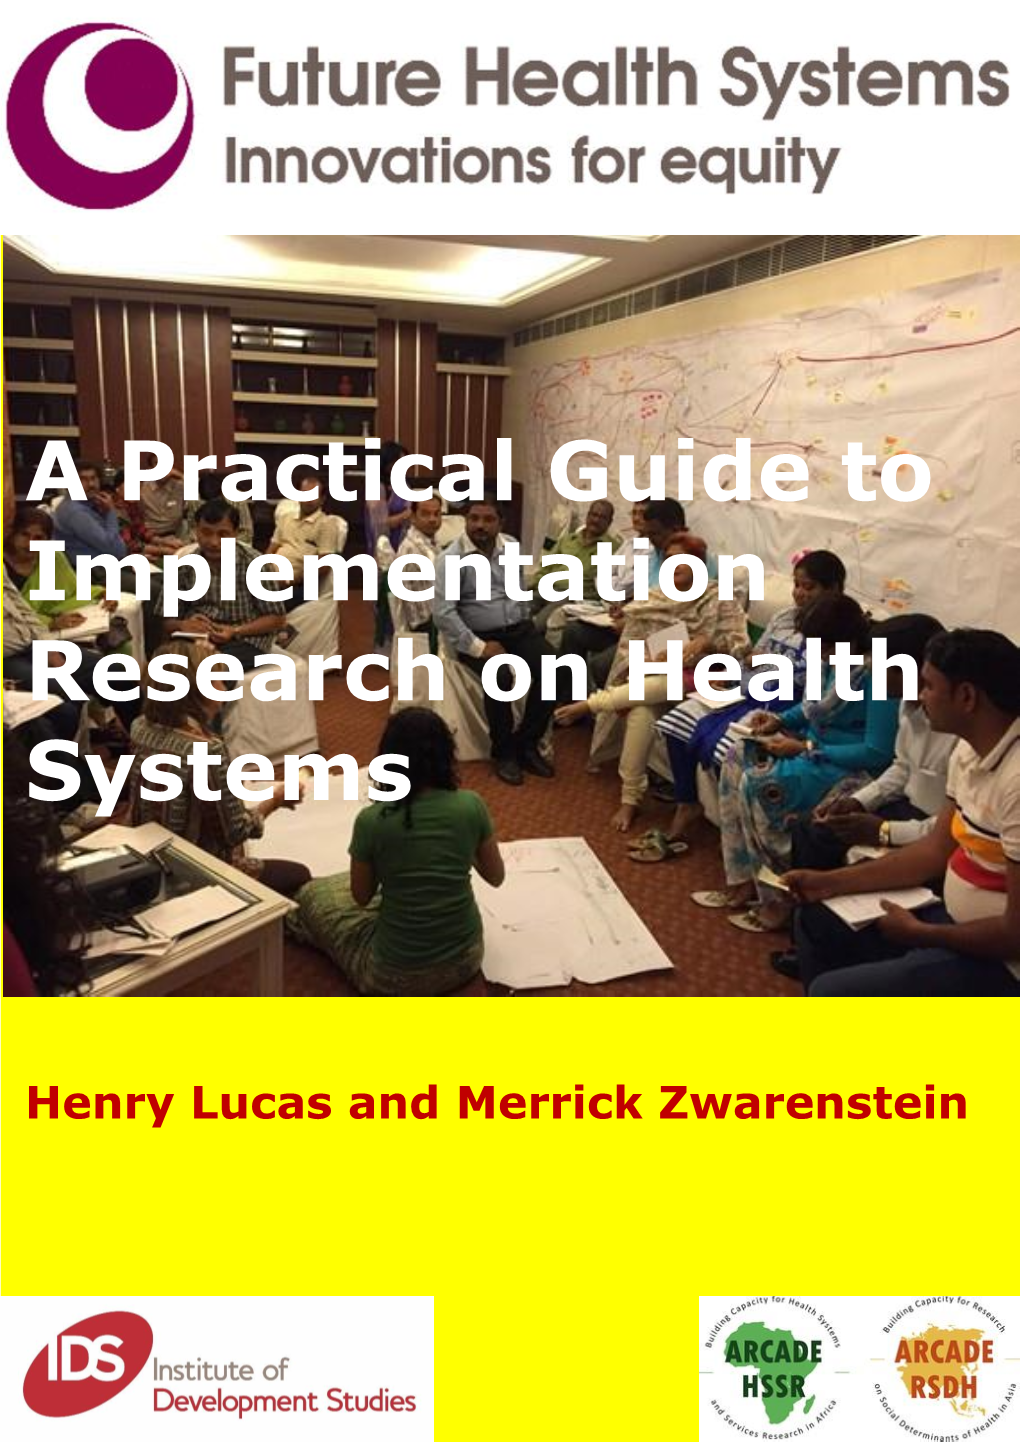 A Practical Guide to Implementation Research on Health Systems